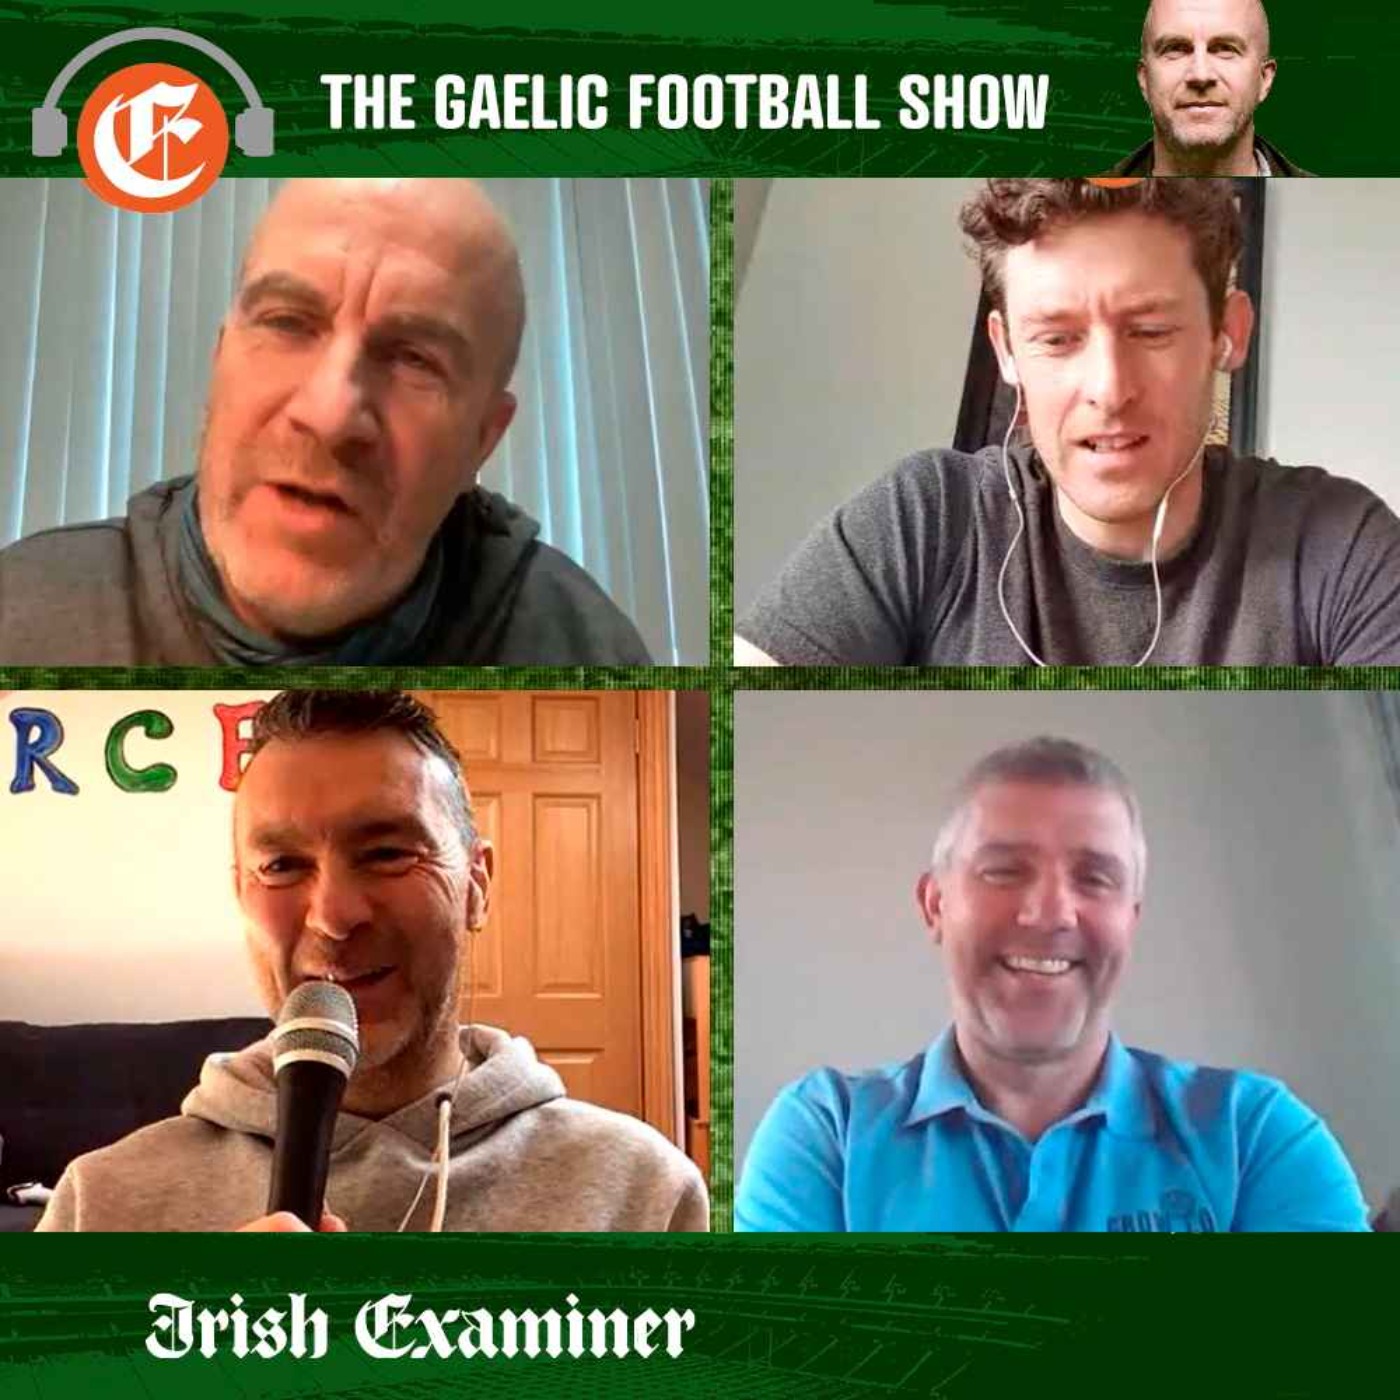 Paul Rouse’s Gaelic Football Show: ‘The open championship’ begins in disciplinary shambles